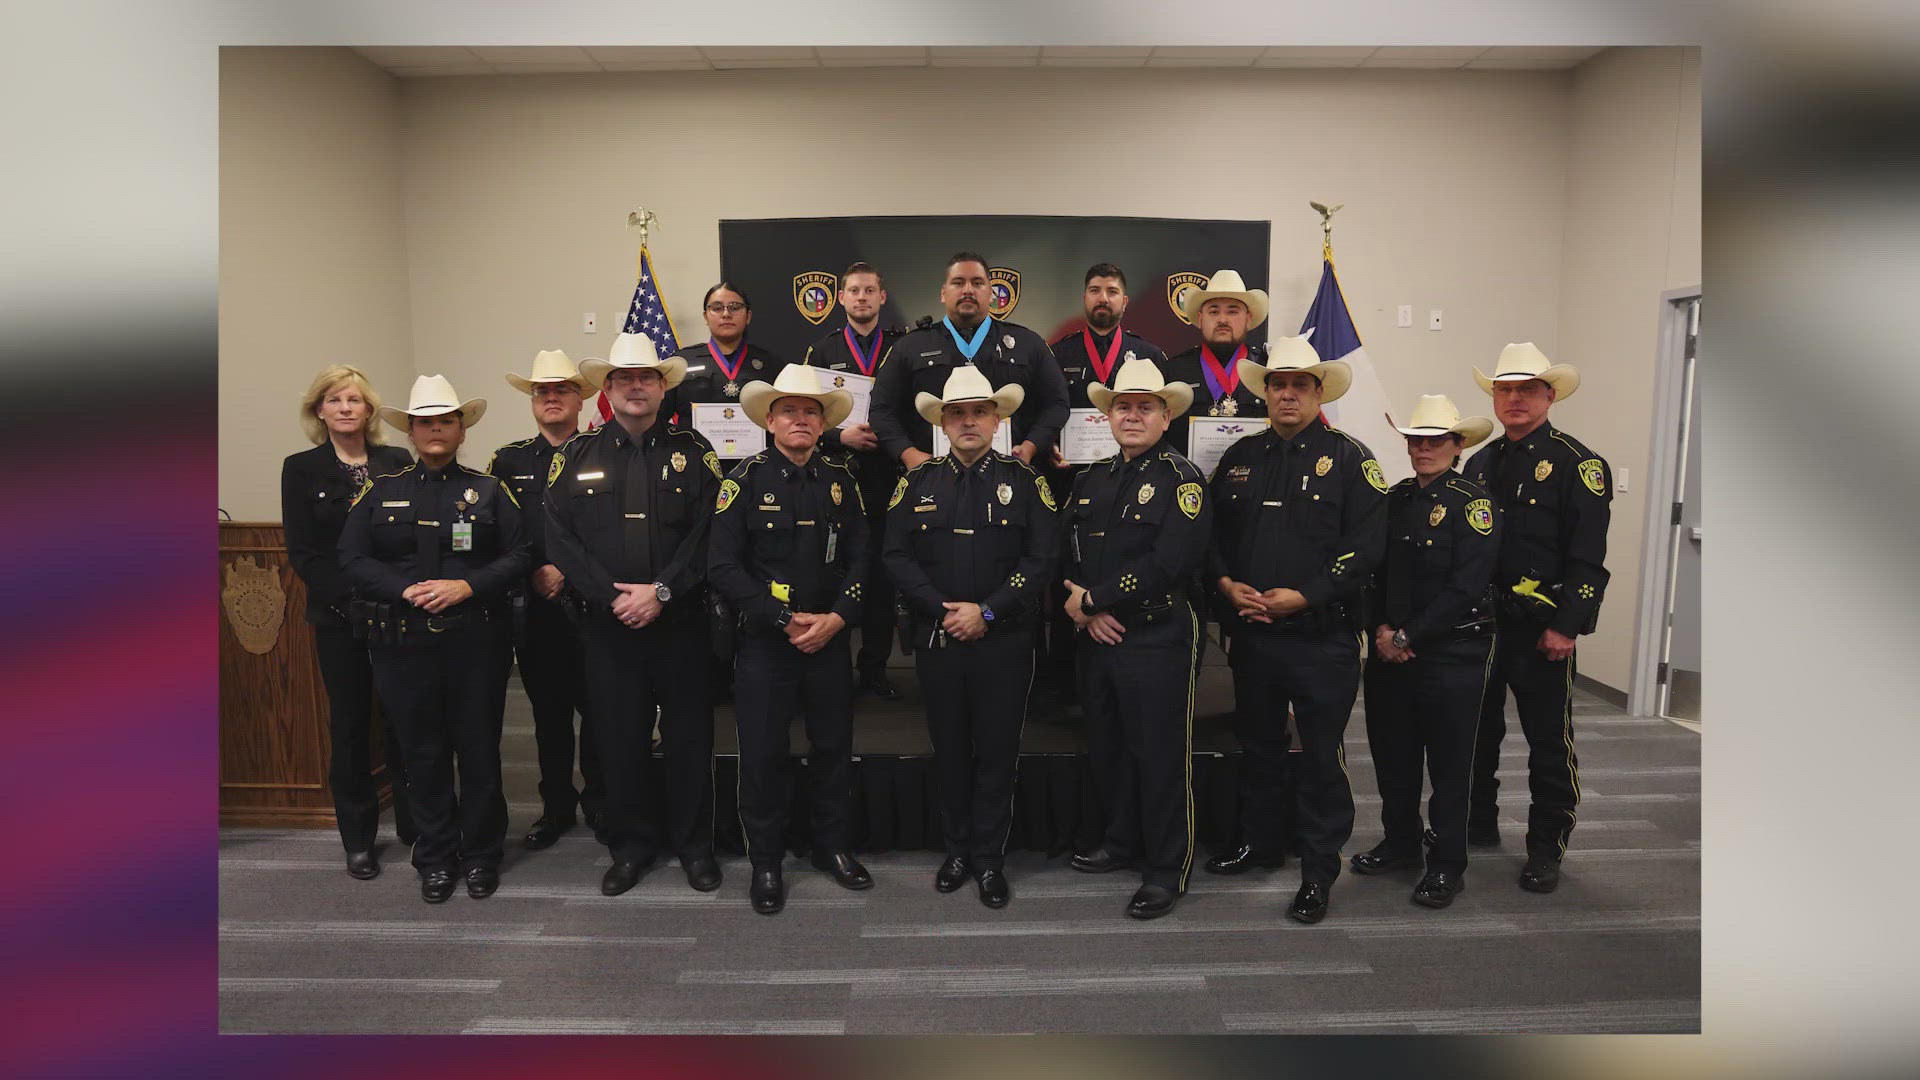 Each deputy received a medal from Sheriff Javier Salazar.